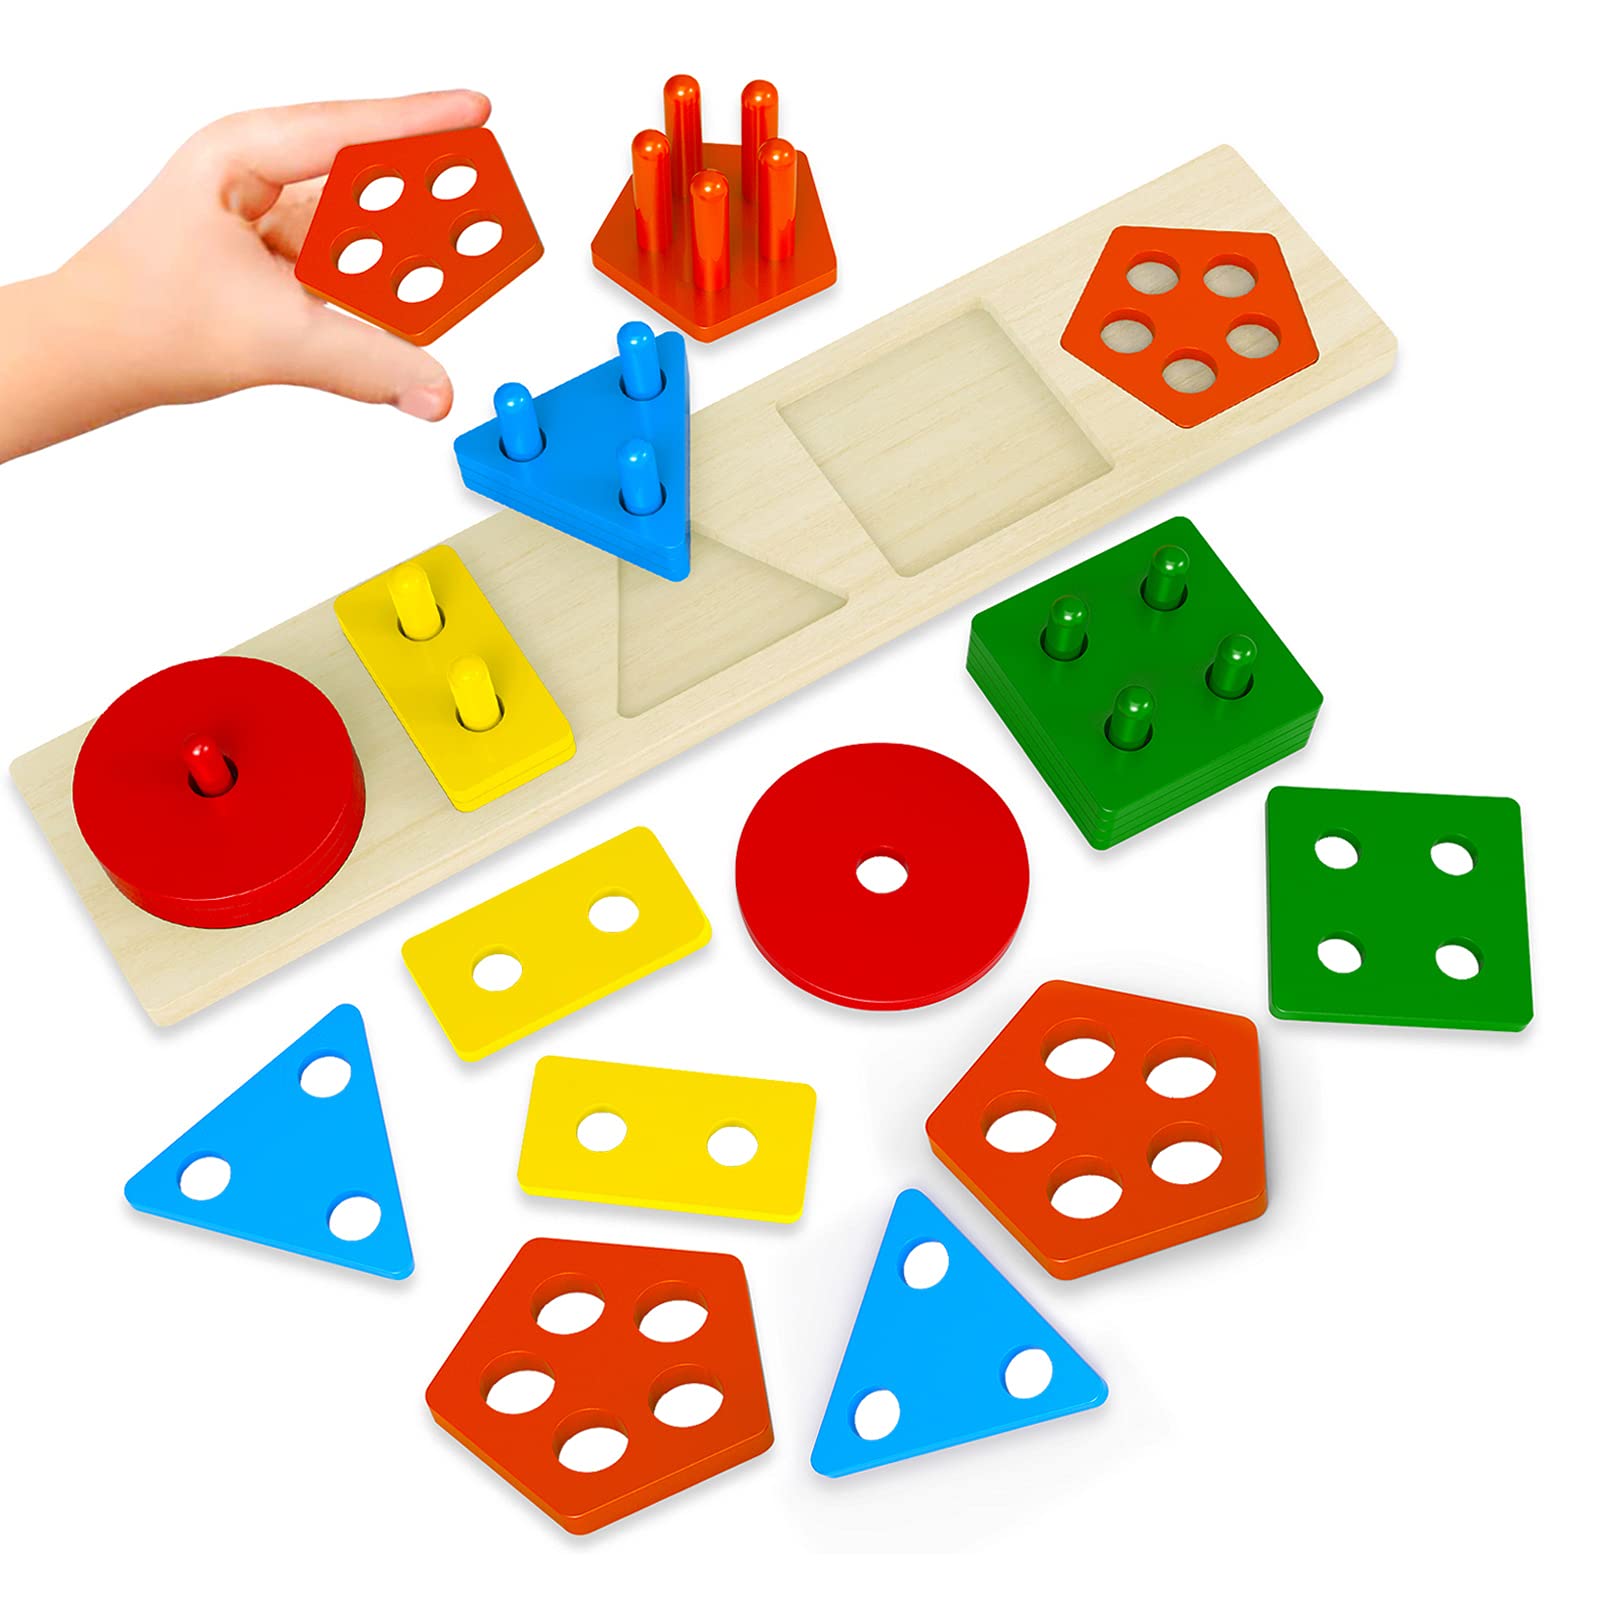 Wooden Sorting Stacking Toys